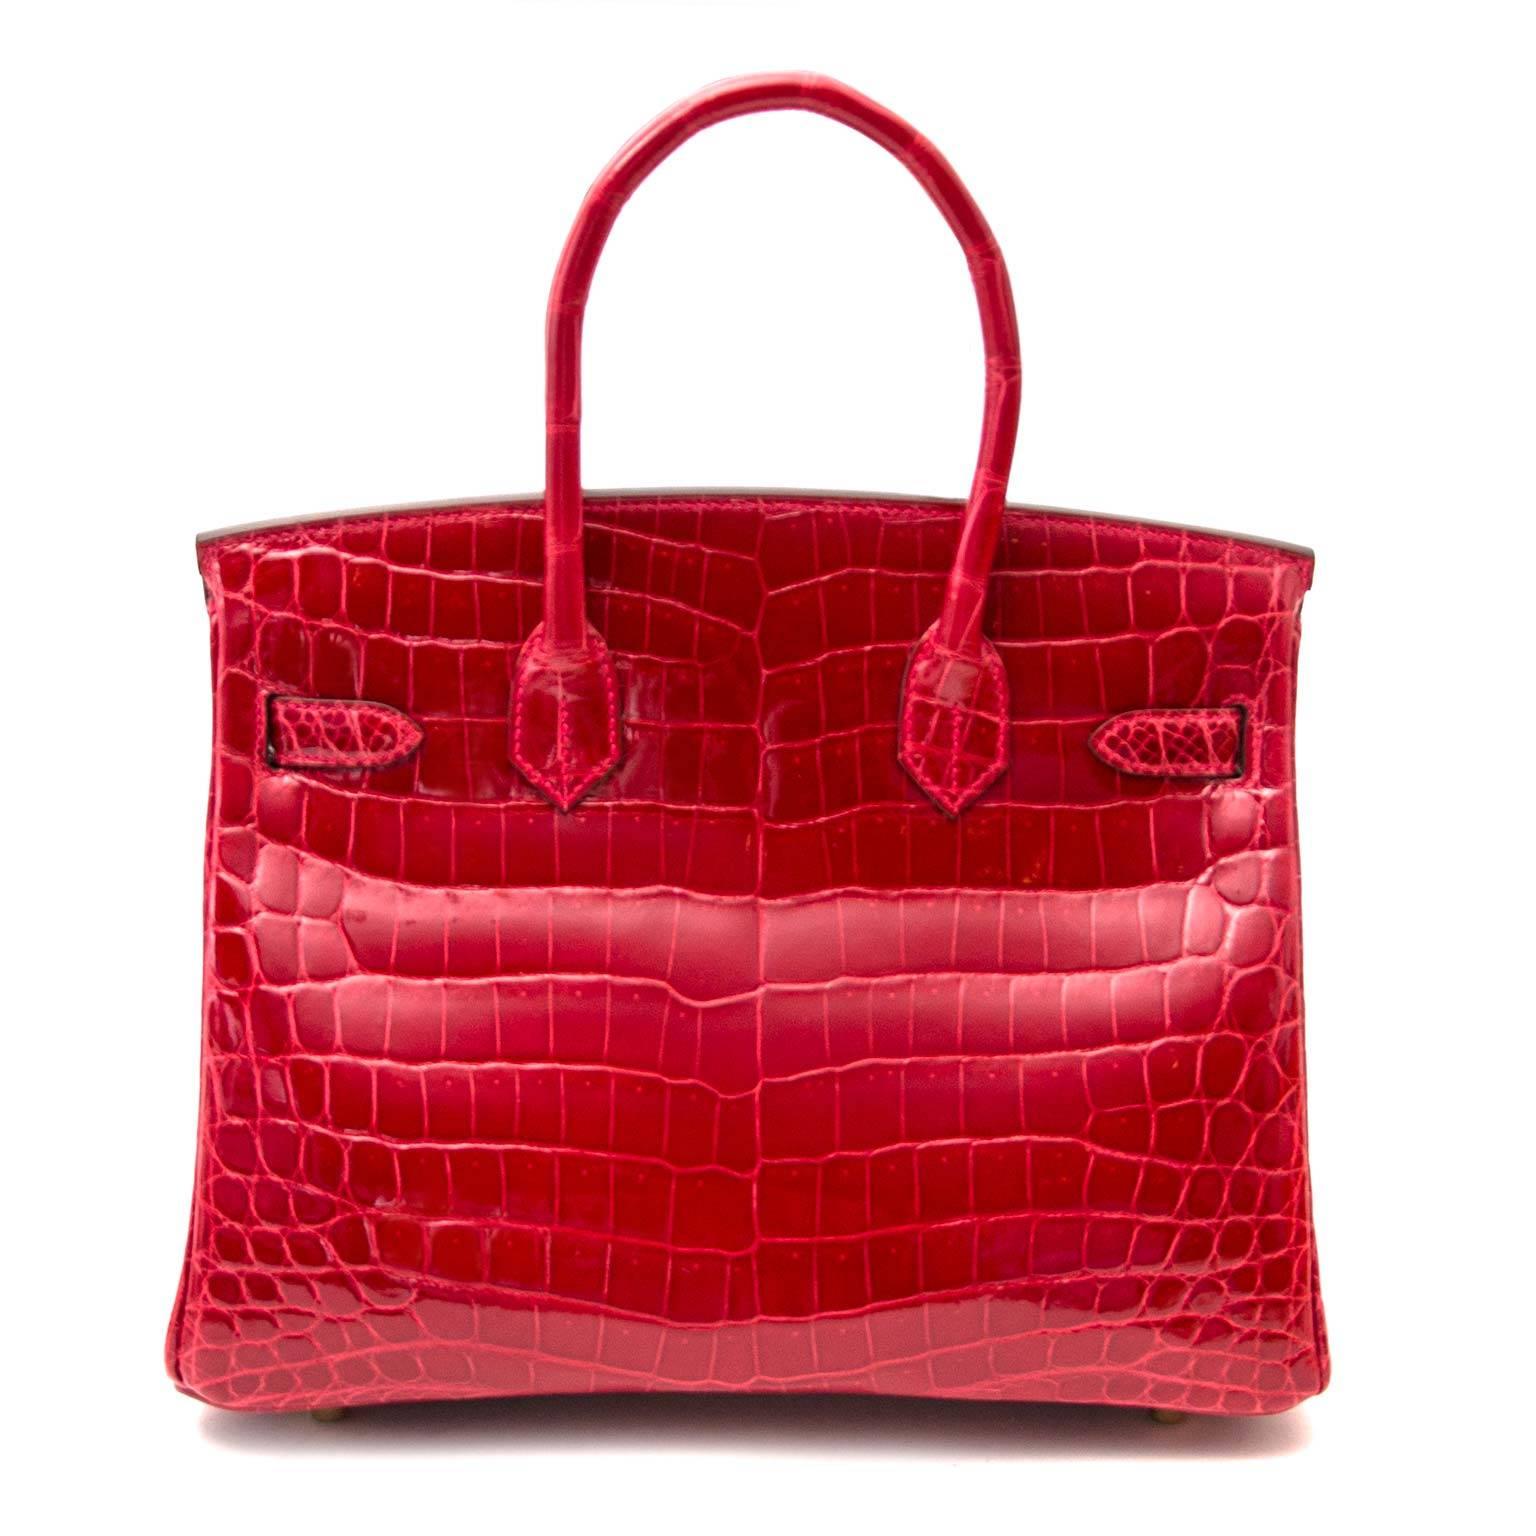 Brand New
Hermès Birkin 30 Crocodile Niloticus Braise GHW

This very rare and ultra luxurious Hermès Birkin comes in a rich and deep 'Braise' red color. The bag features gold toned hardware which gives this Birkin bag a very chic look. The bag is